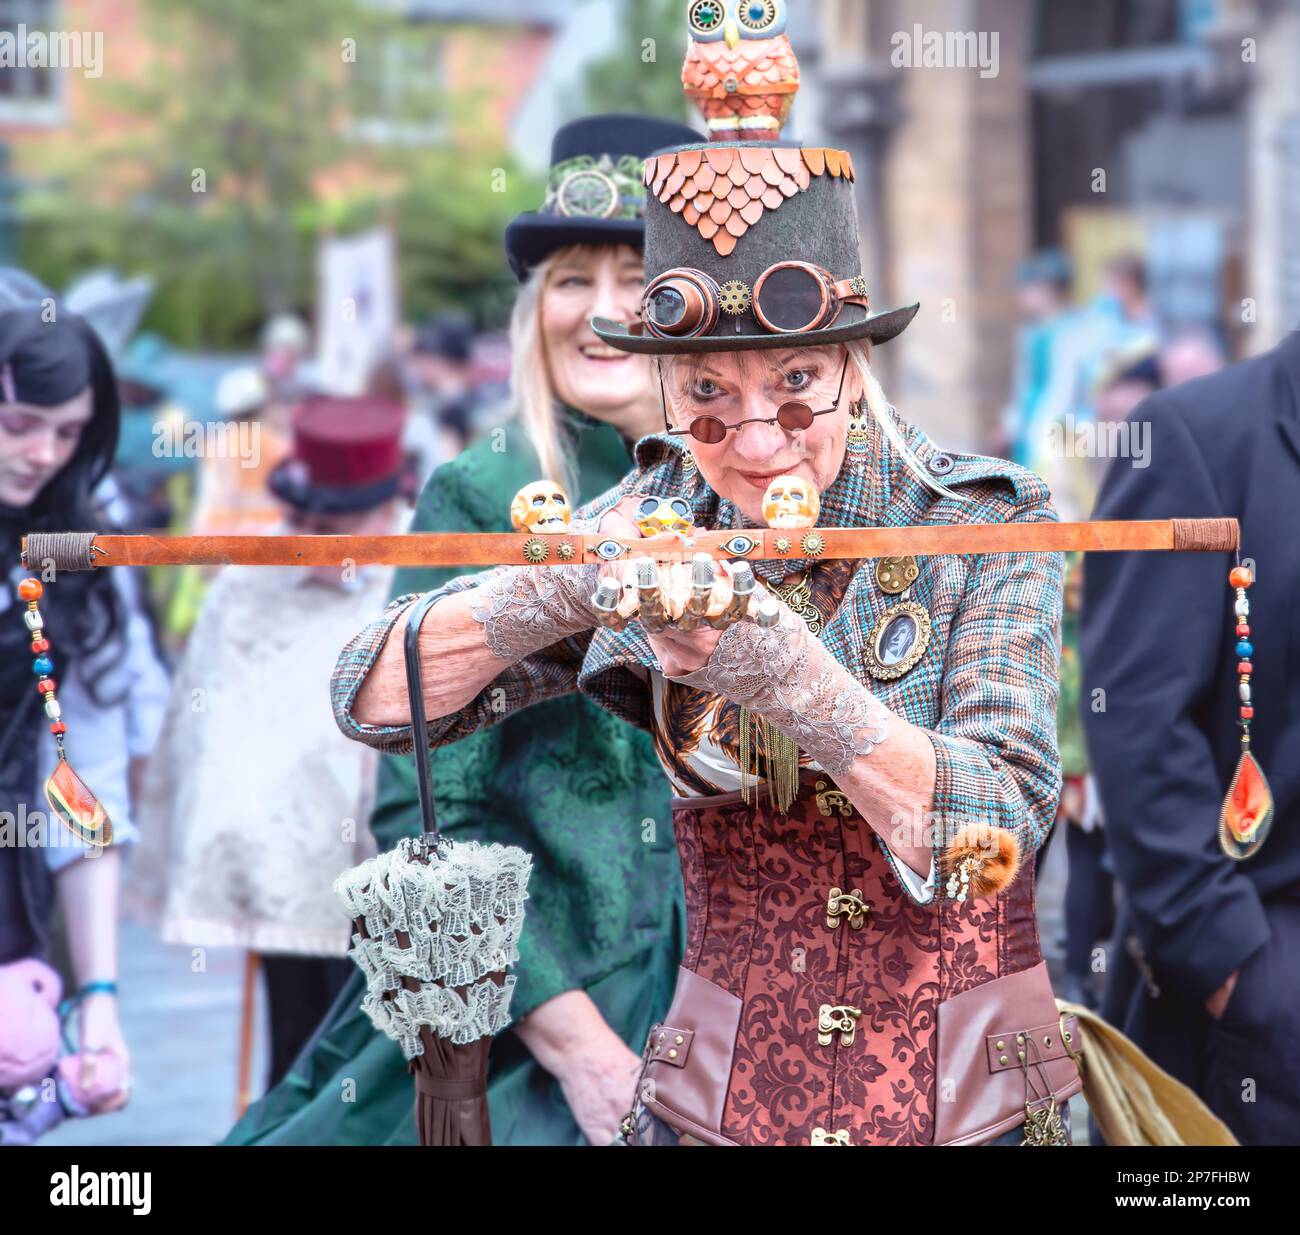 A female steampunk with a crossbow taking aim directly at the camera. Stock Photo